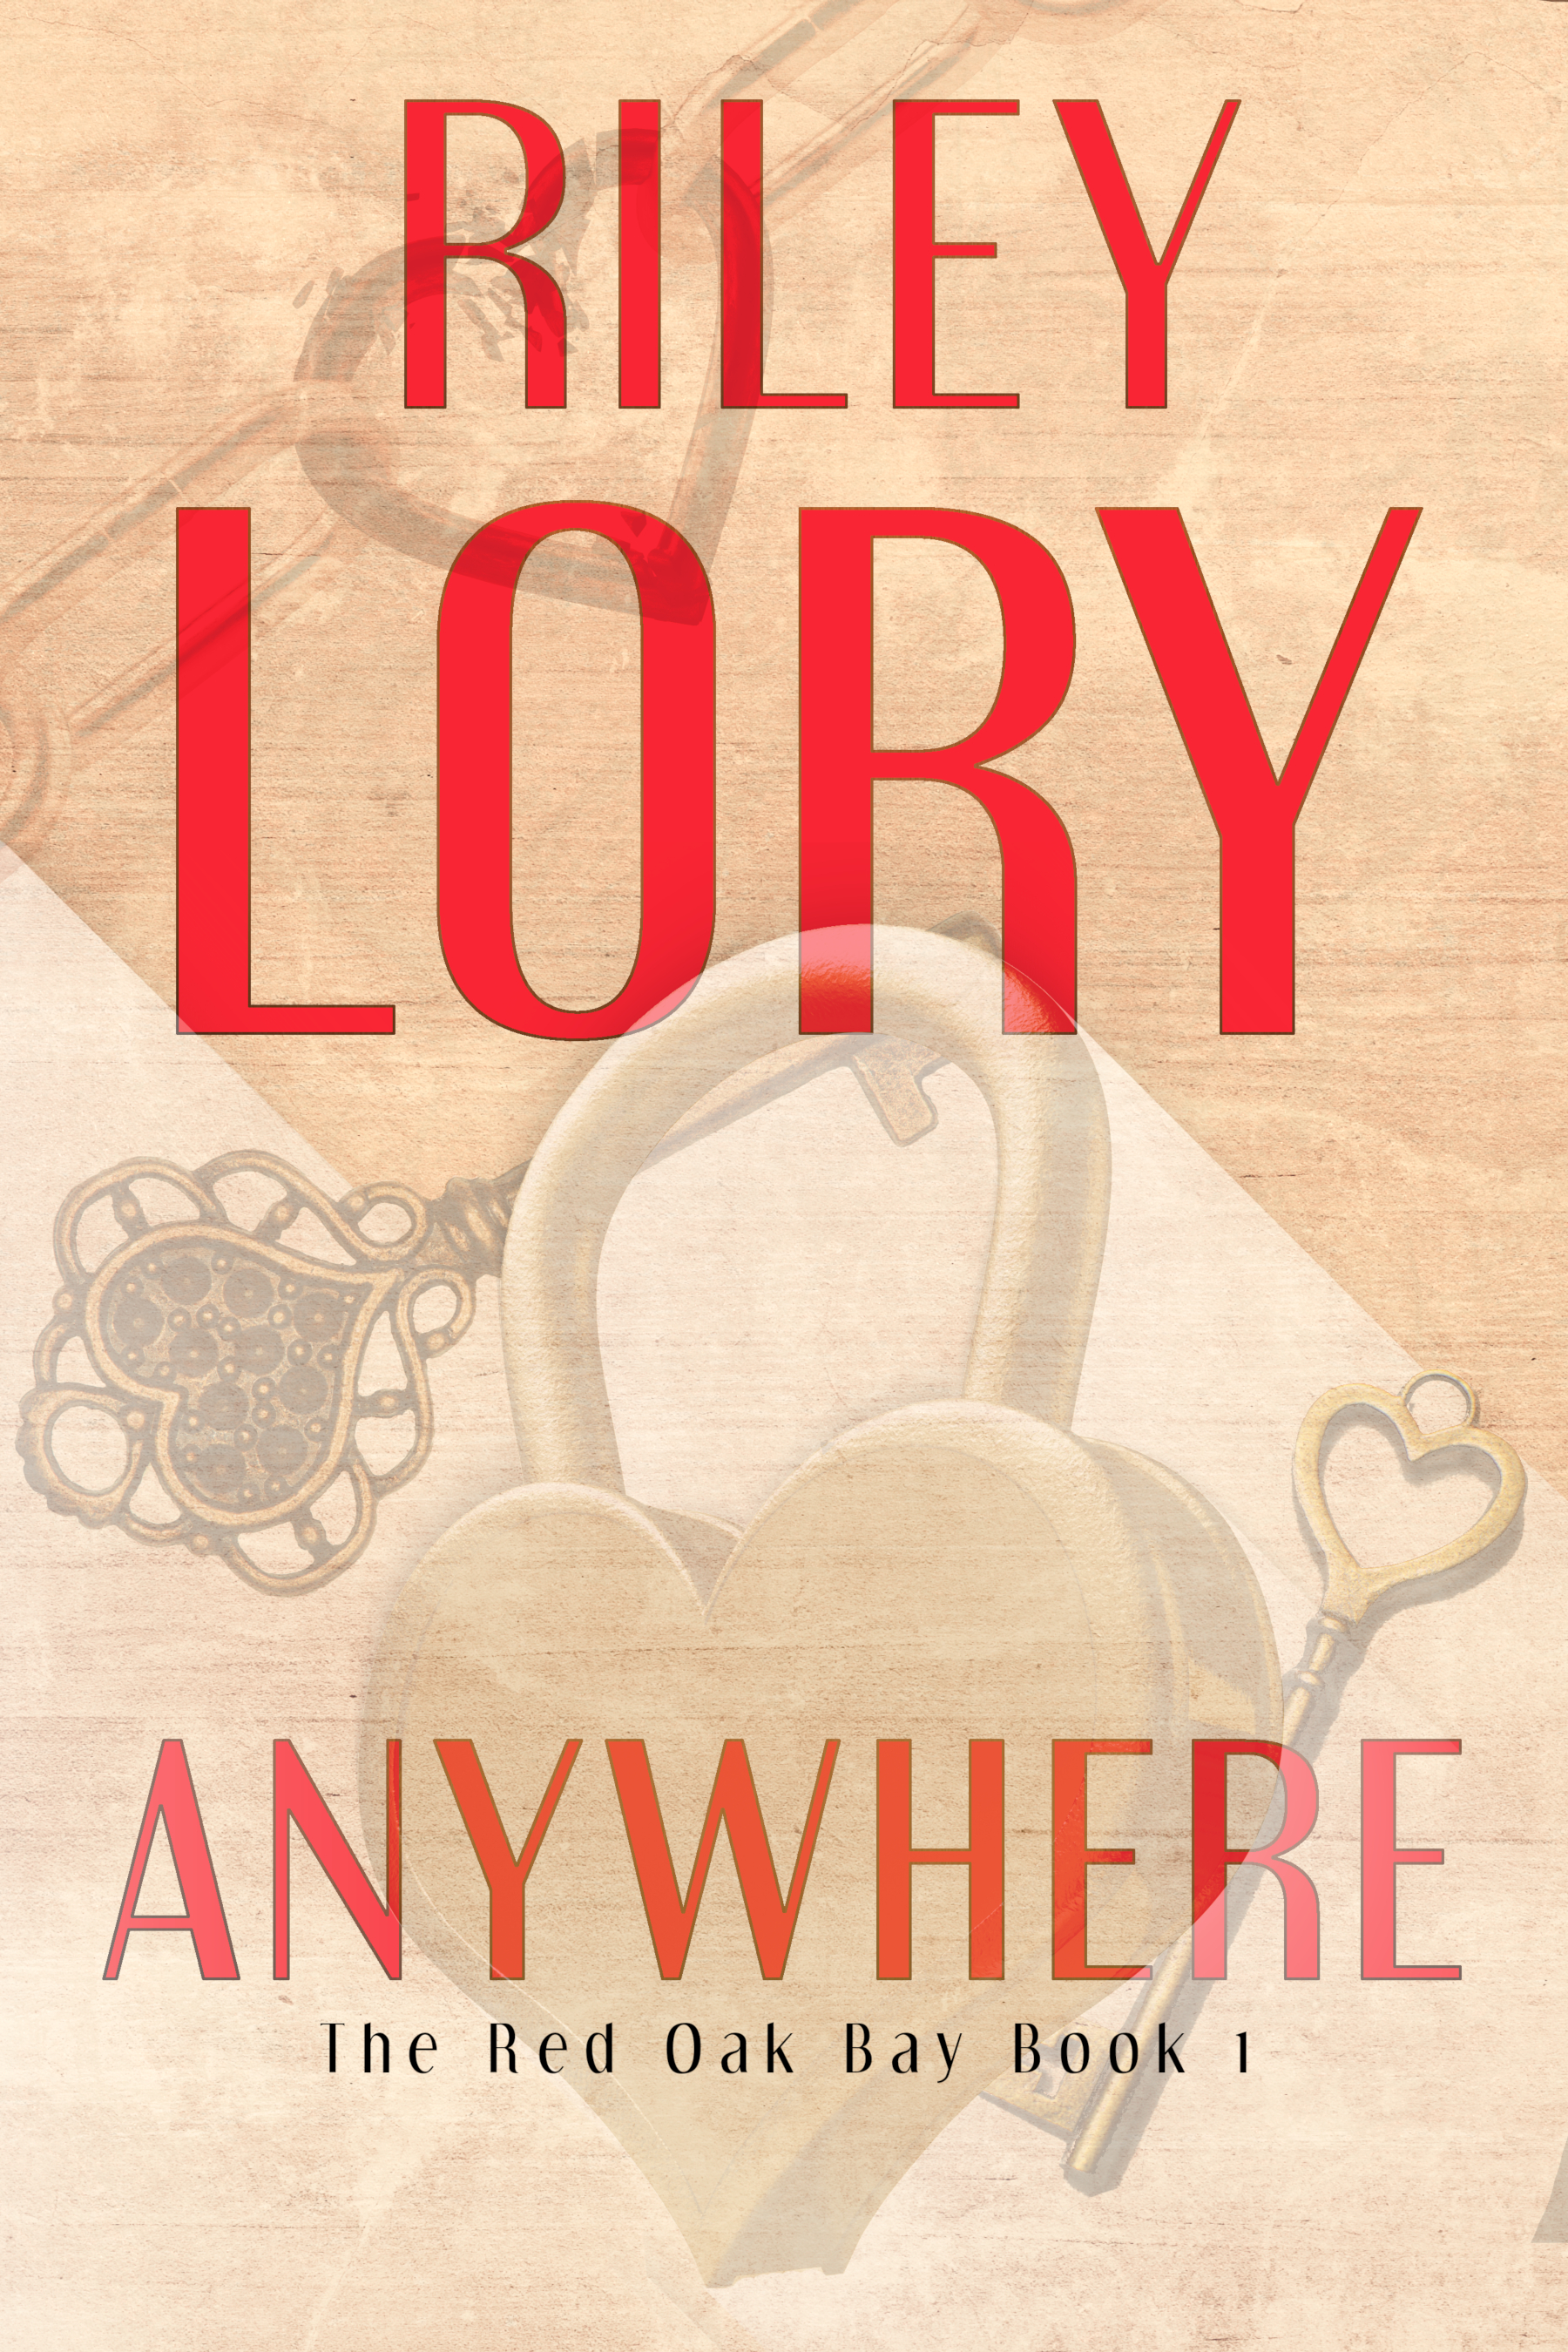 FREE: Anywhere by Riley Lory